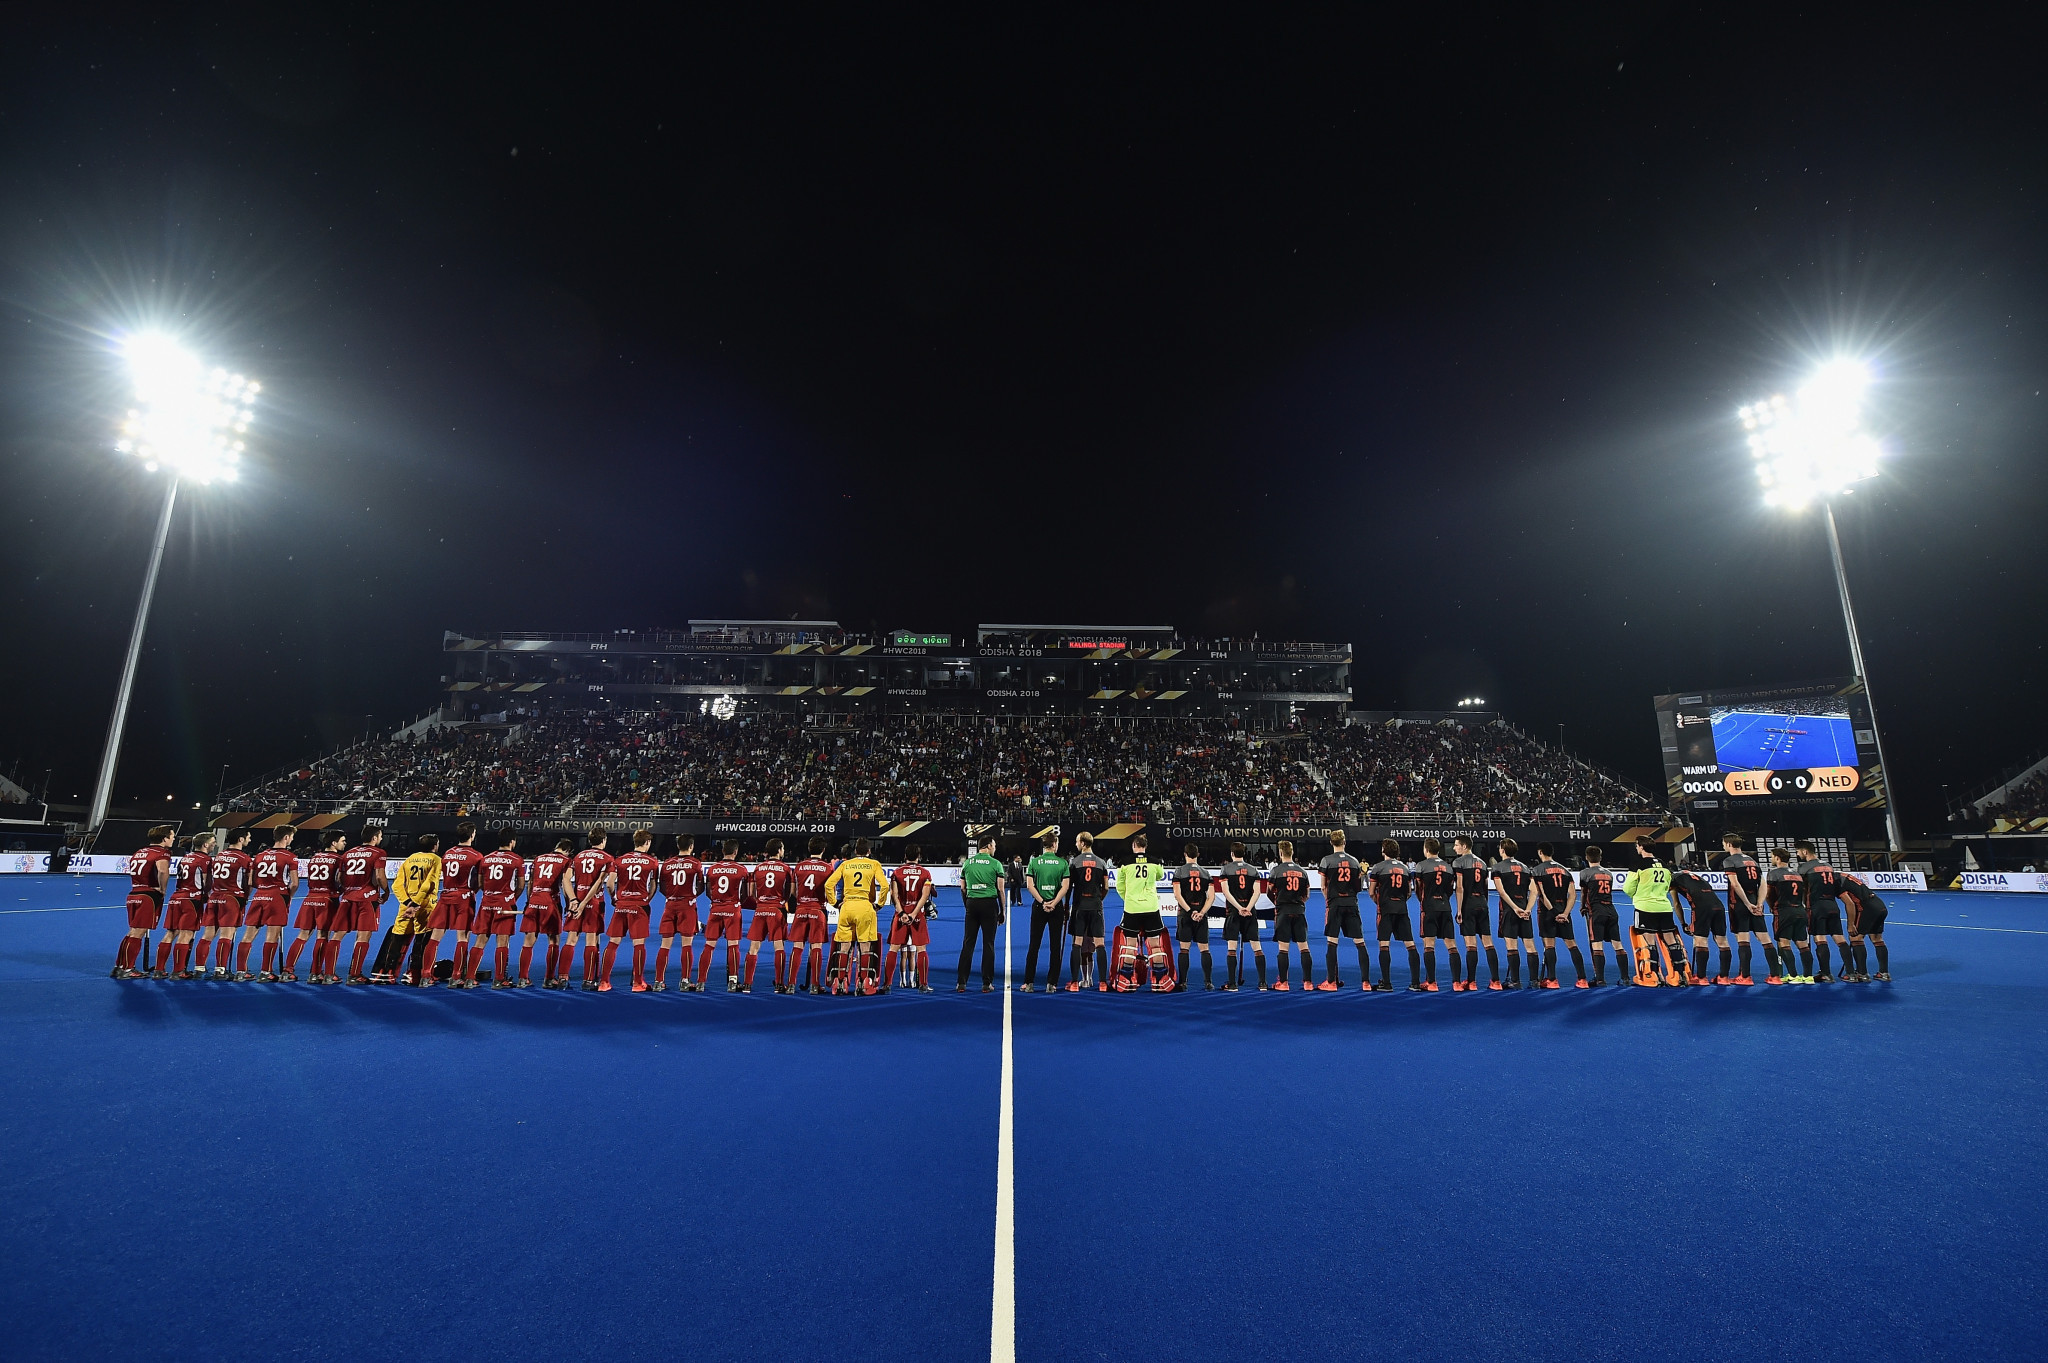 The Kalinga Stadium in Bhubaneswar is set to host next month's Junior Men's World Cup, which is scheduled to begin on November 24 ©Getty Images